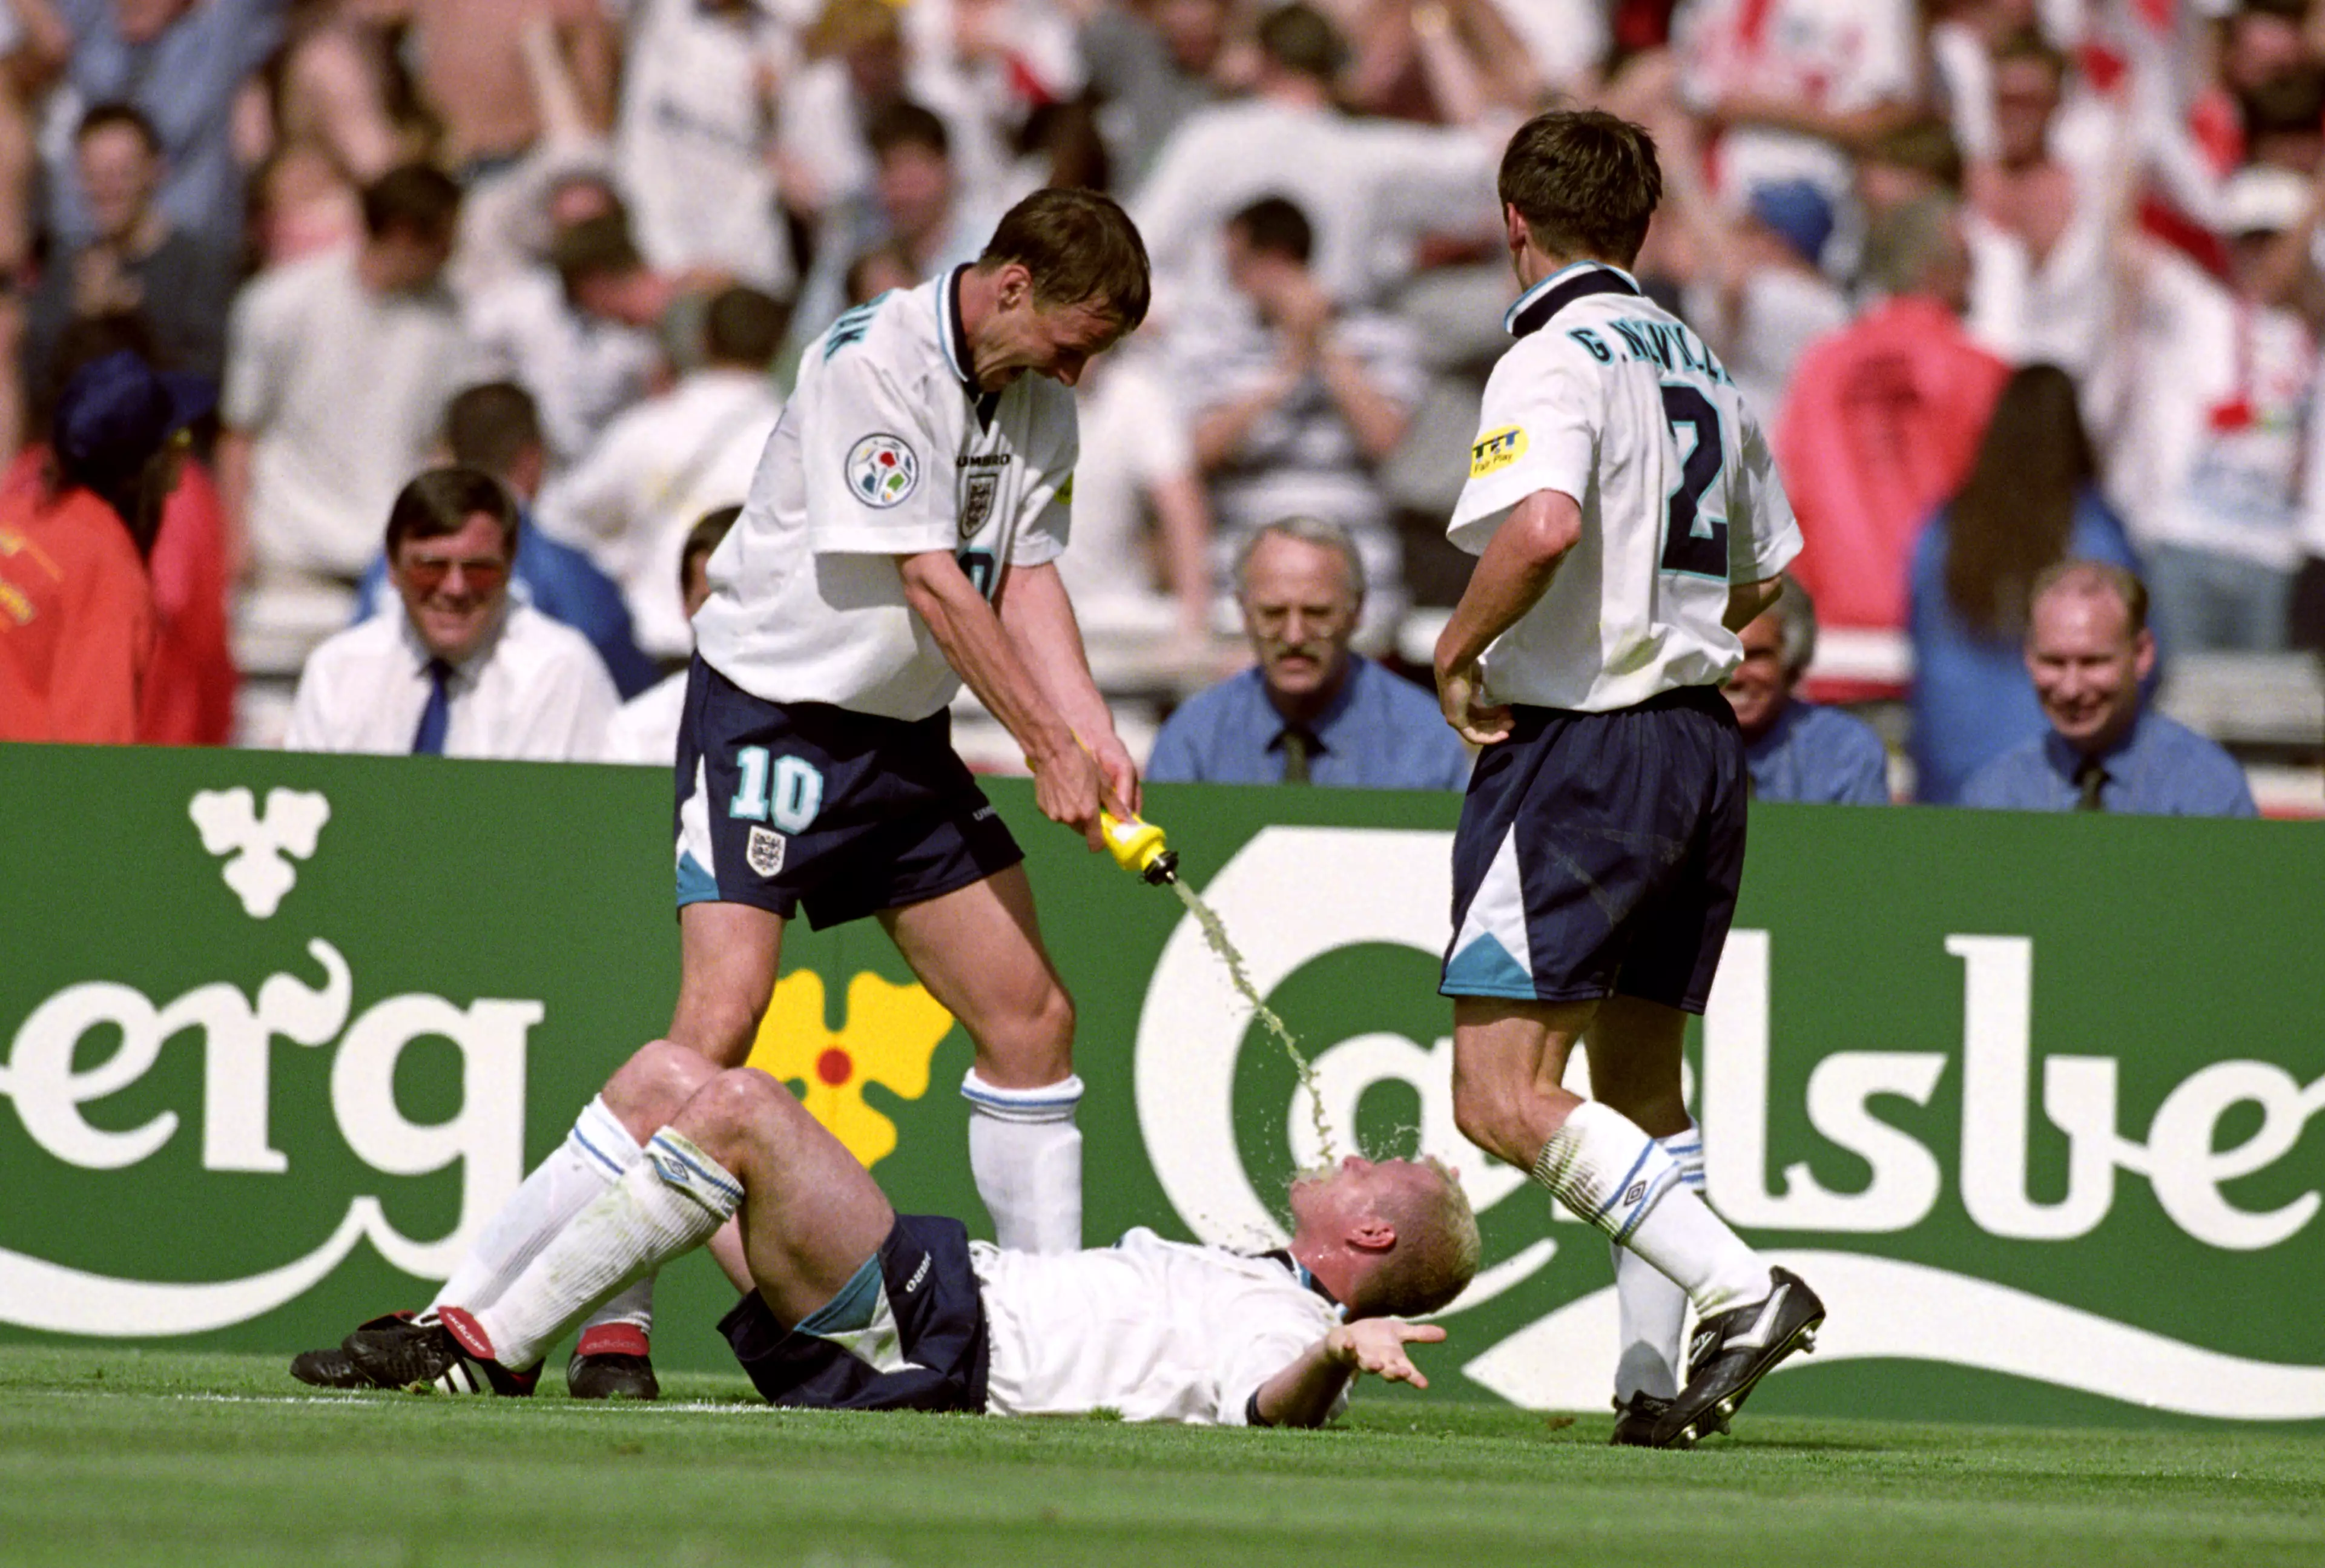 Paul Gascoigne's celebration against Scotland during the tournament has gone down in history. (Image